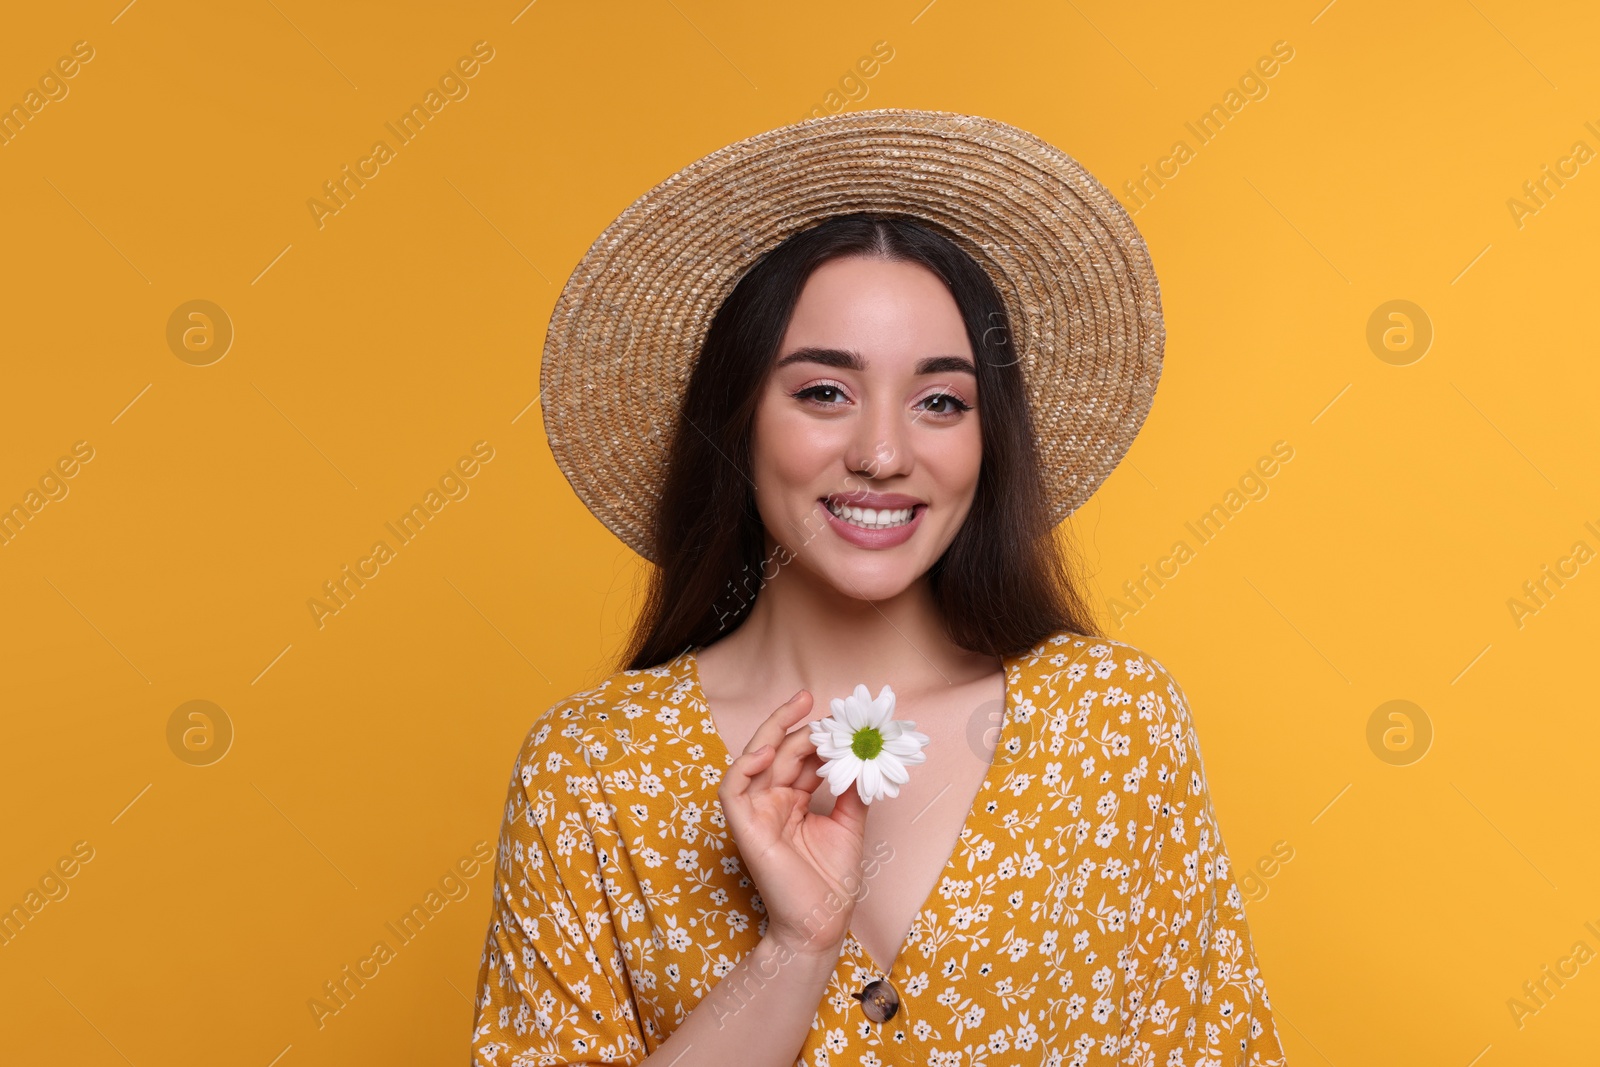 Photo of Beautiful woman with spring flower in hand on yellow background